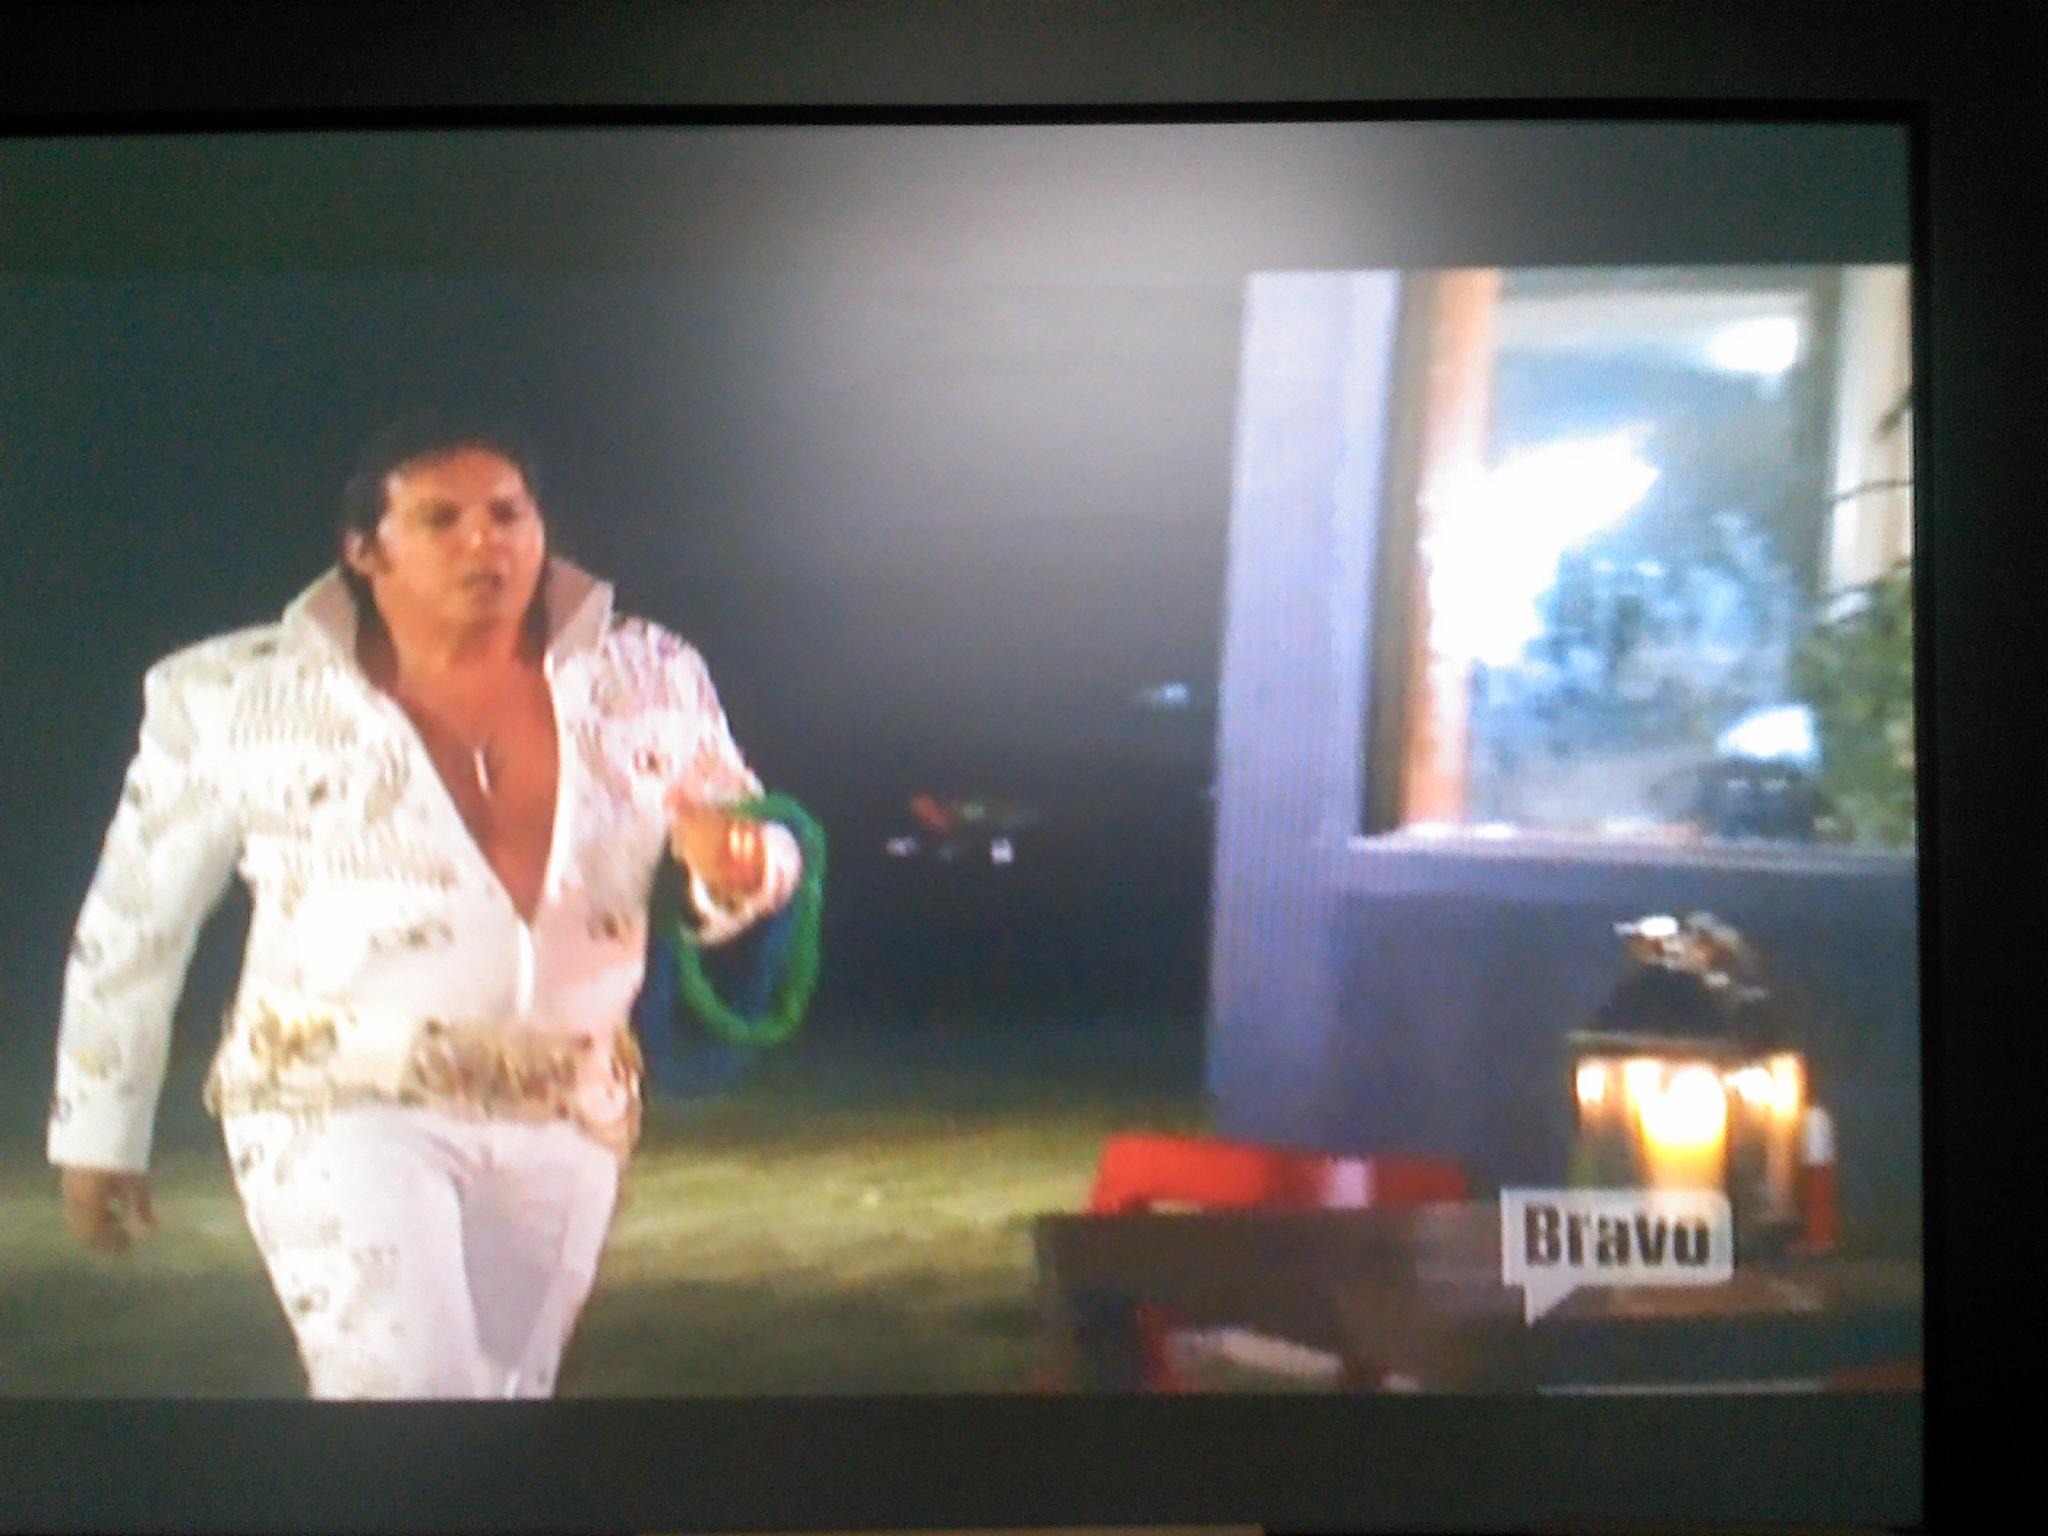 Dean Ciallella as Elvis, entering the outdoor dining area on the set of Bravo Television's Real Housewives of New York City.